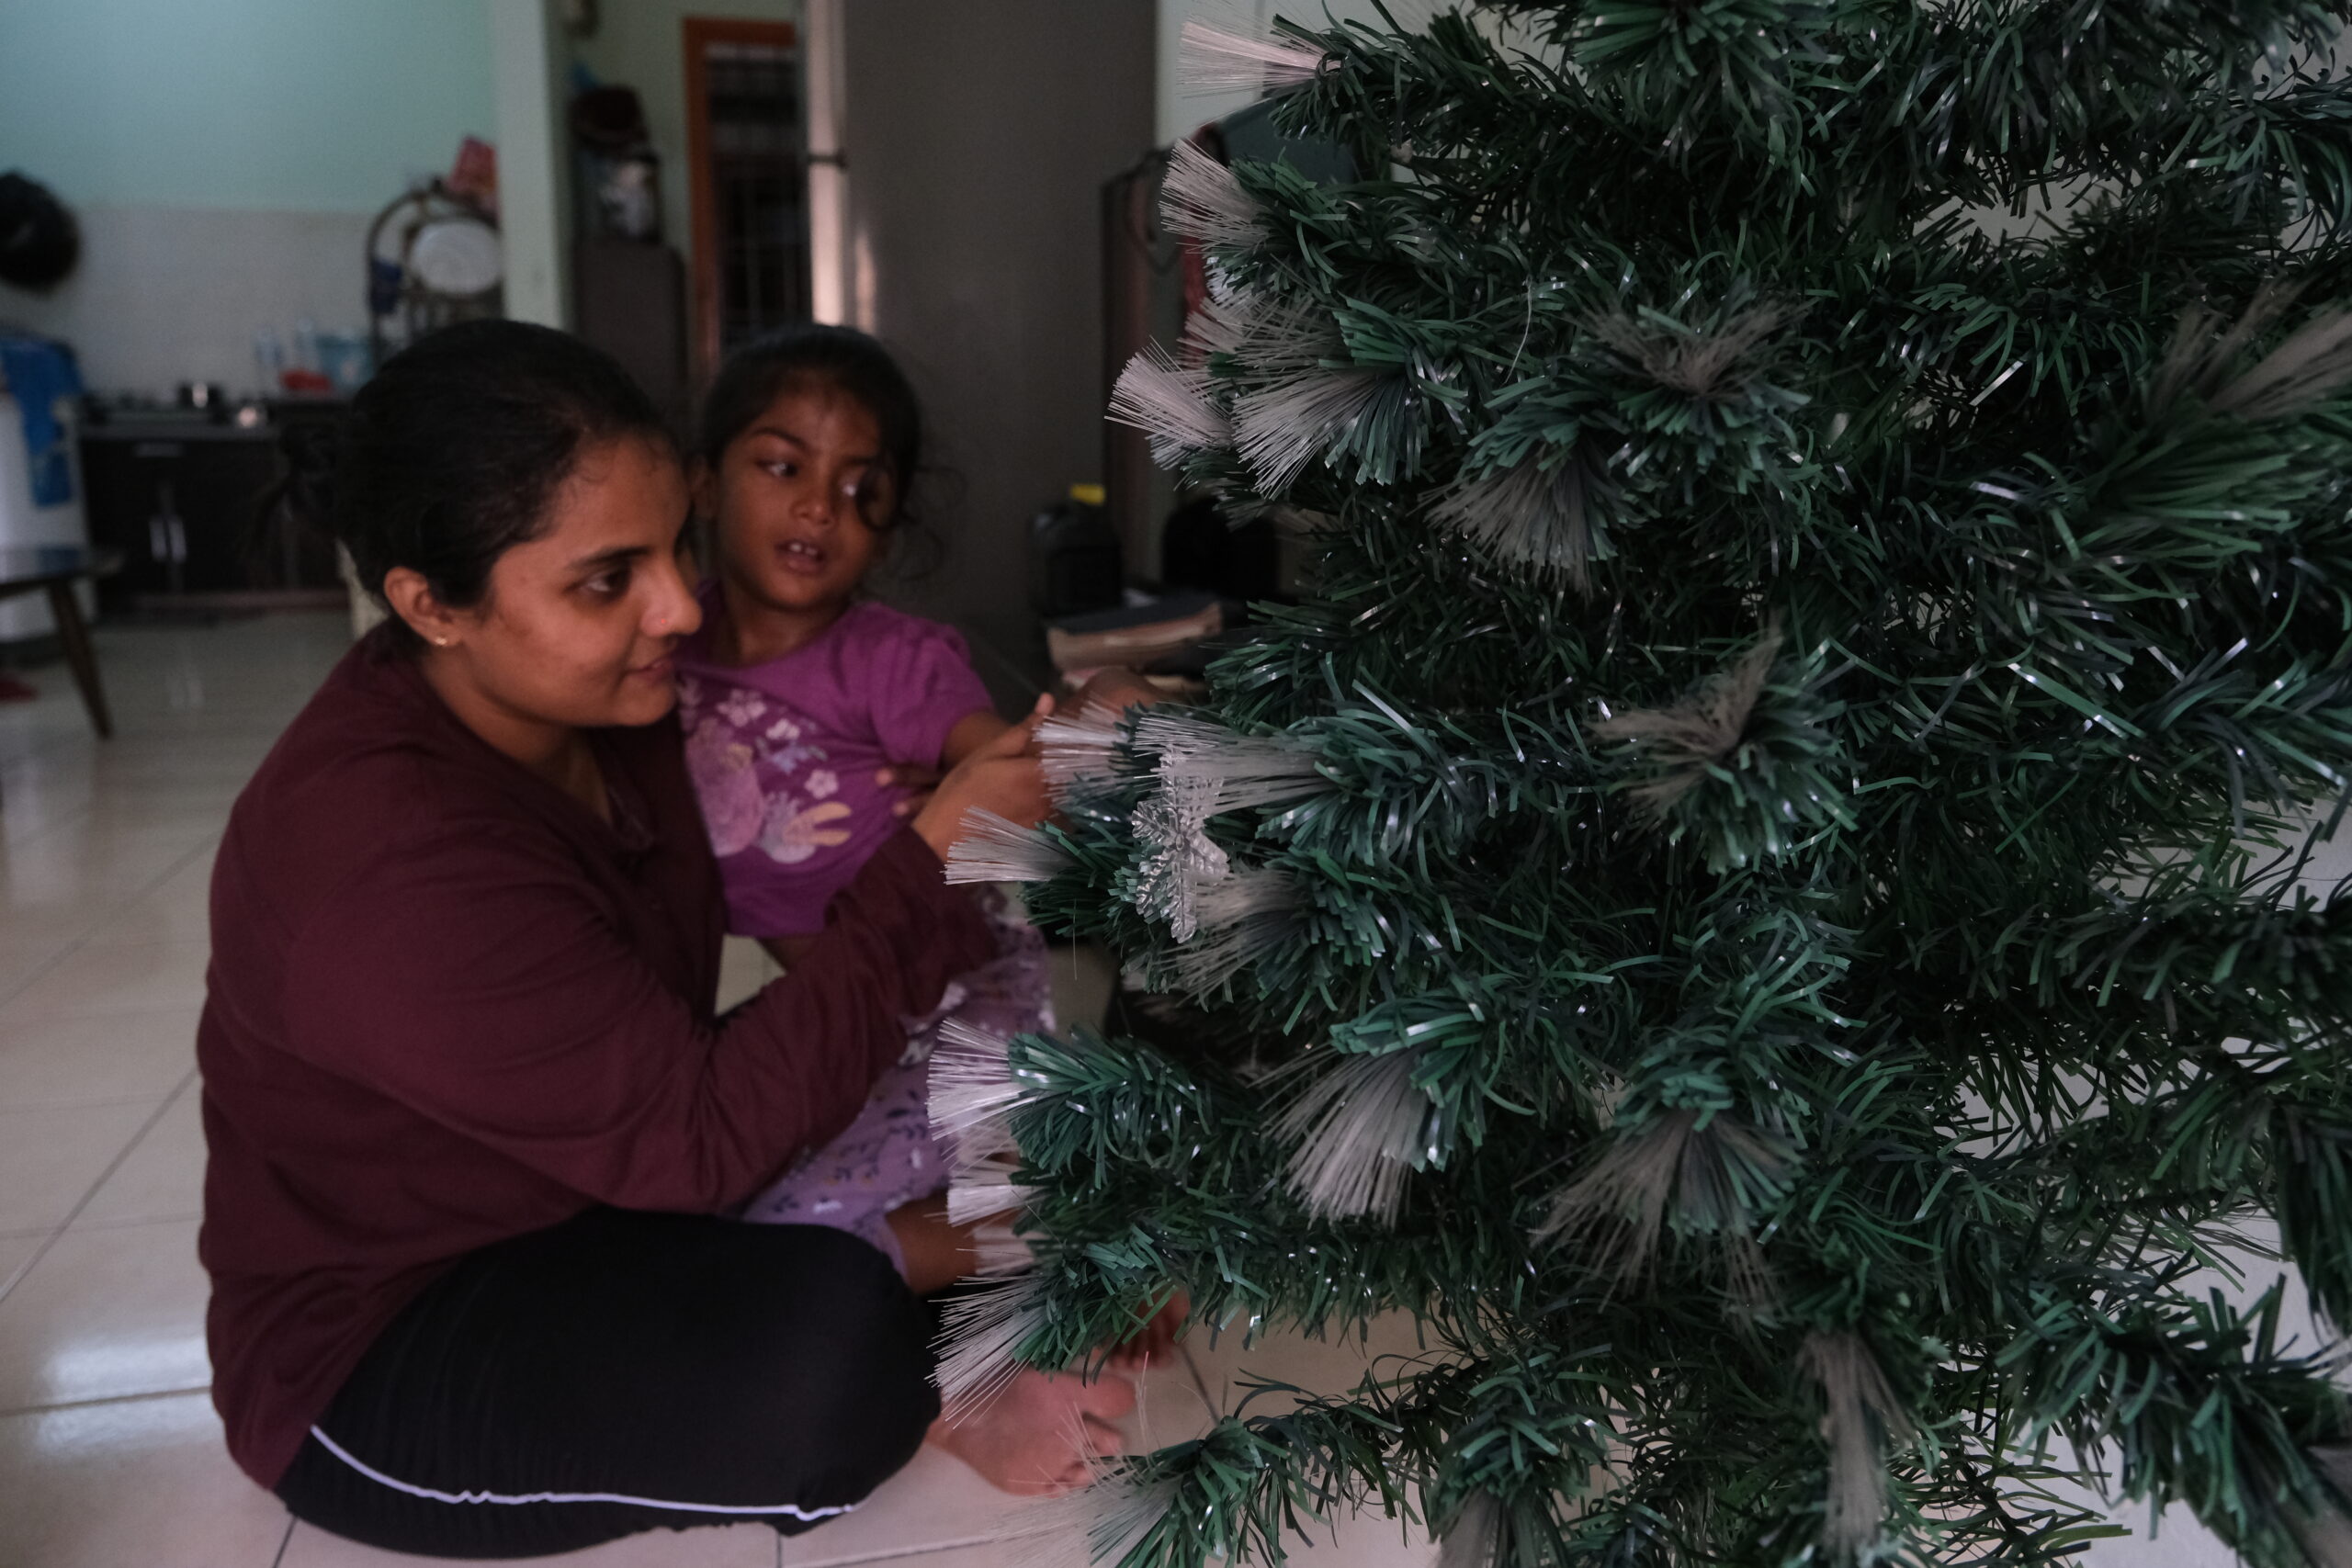 Dreaming of a breezy Christmas: single mothers endure holiday hardships with resilience